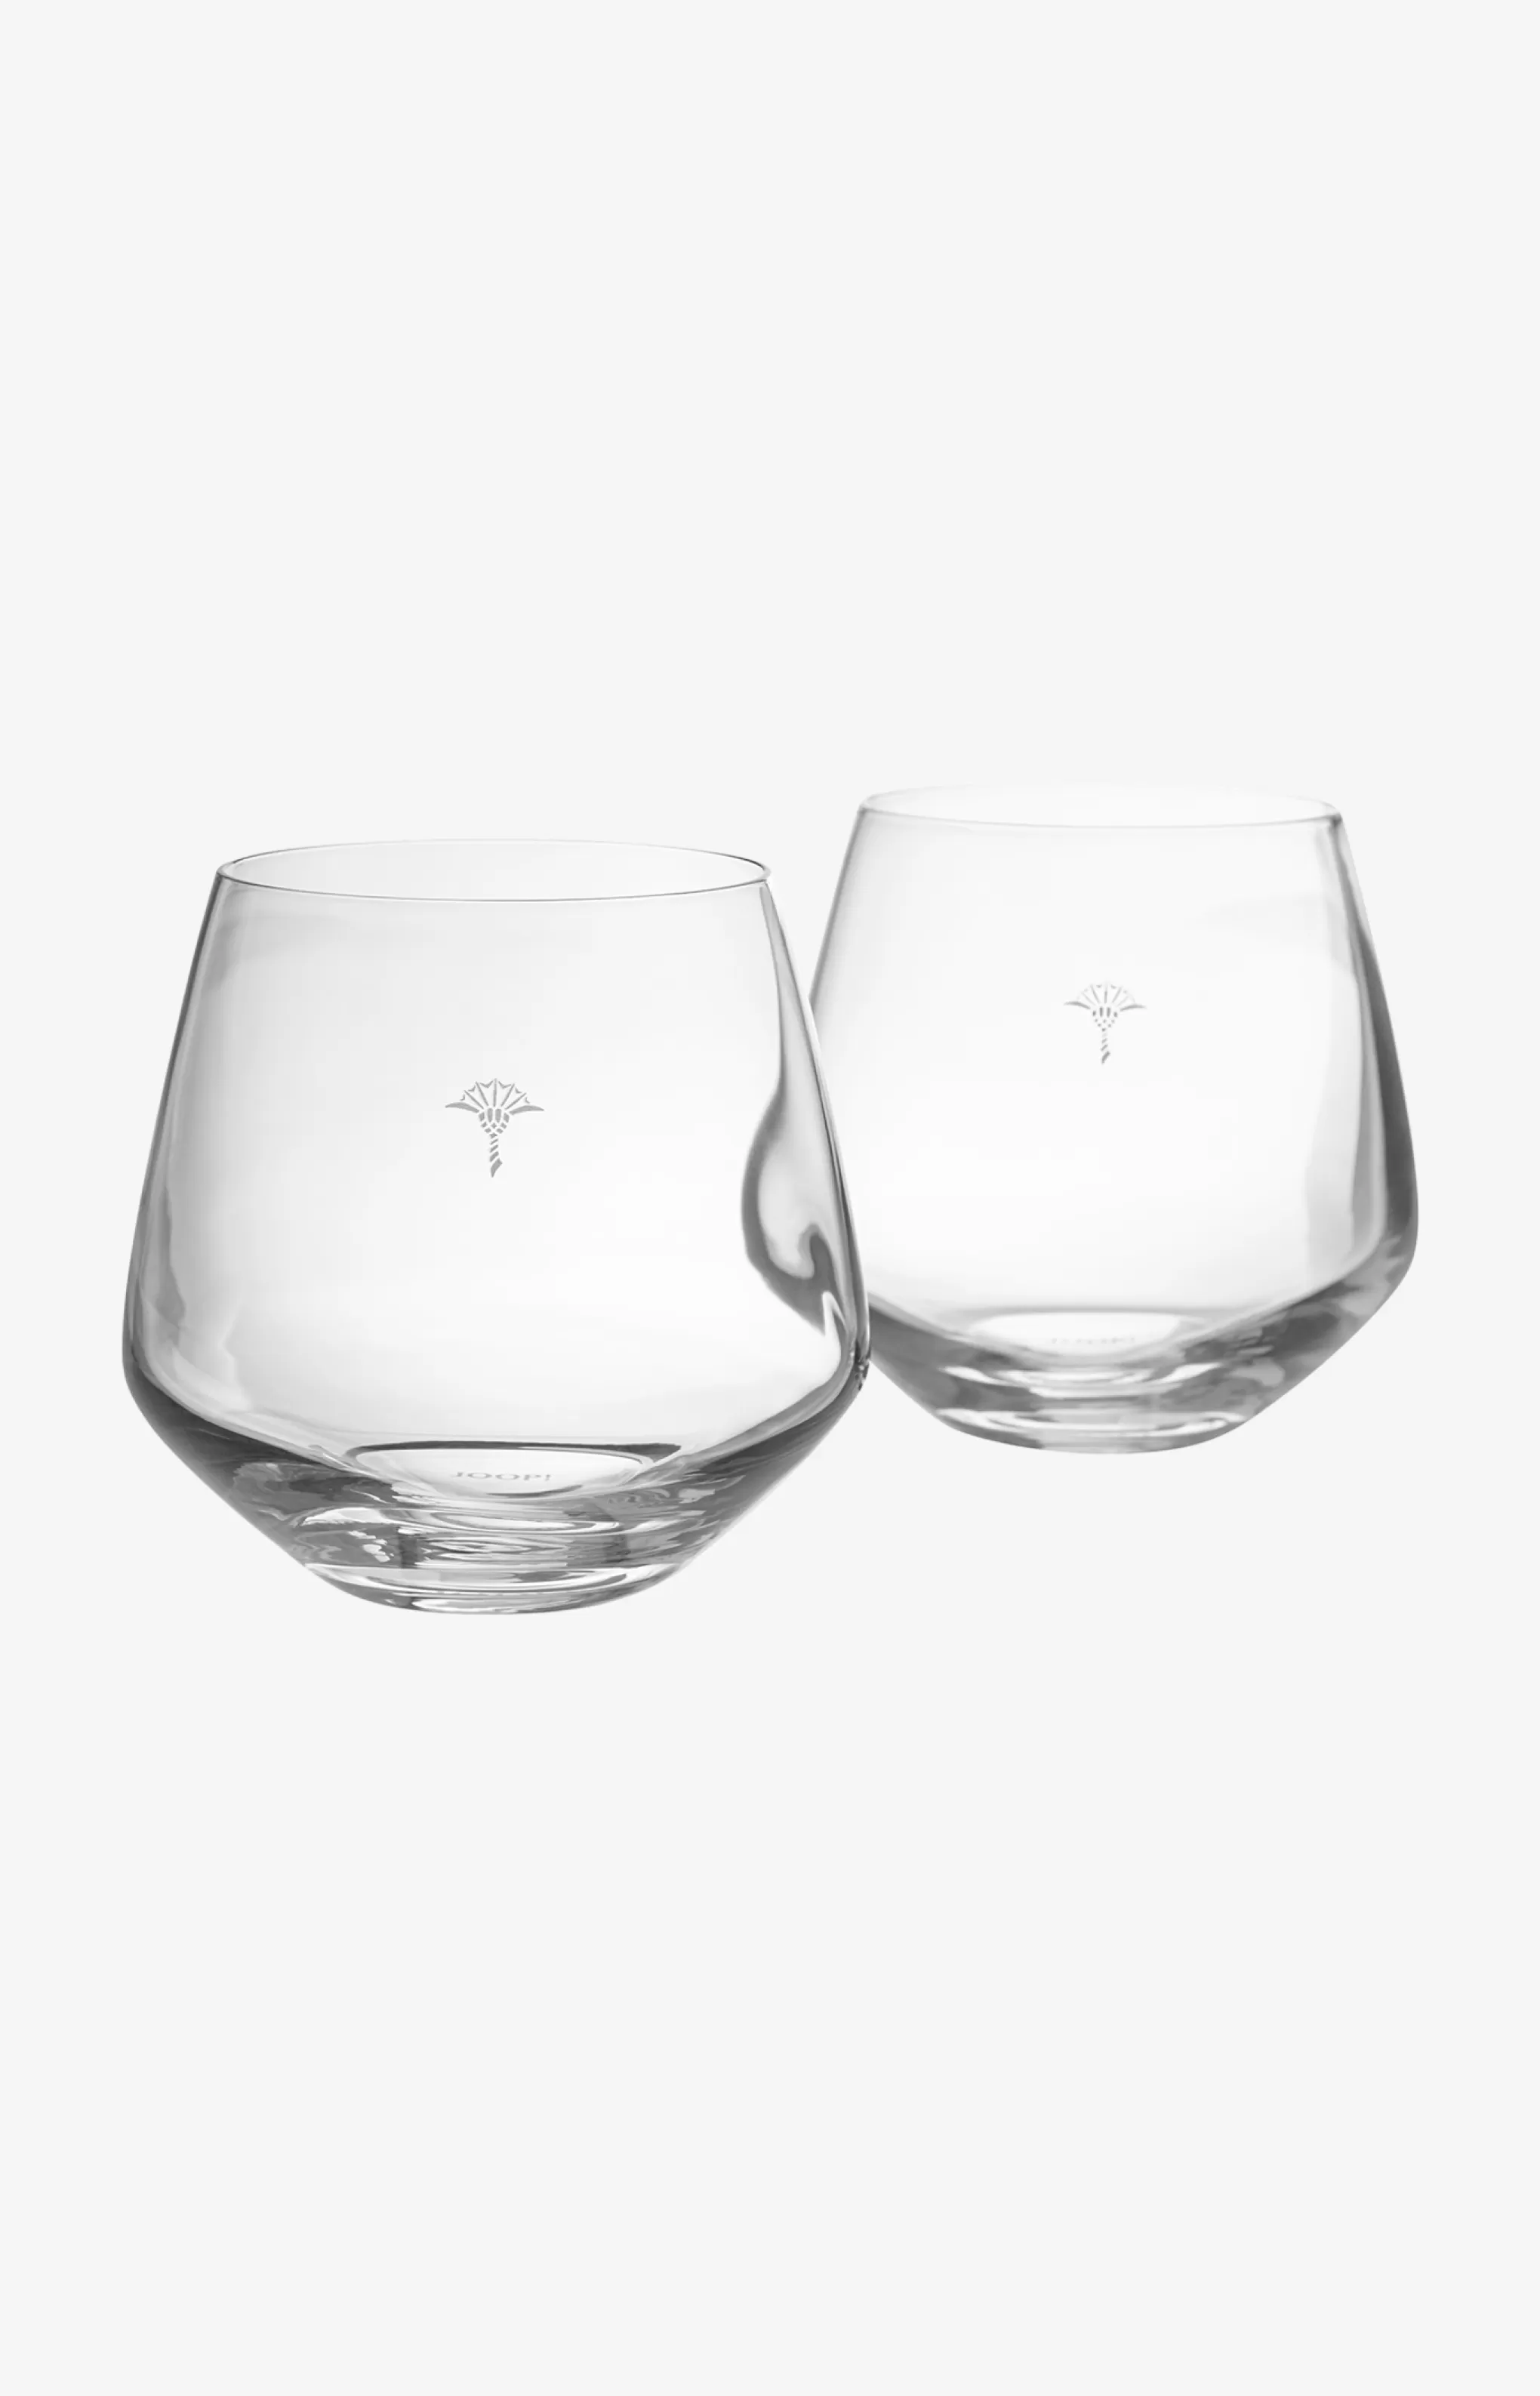 Glassware | Discover Everything*JOOP Glassware | Discover Everything Single Cornflower Tumblers - Set of 2